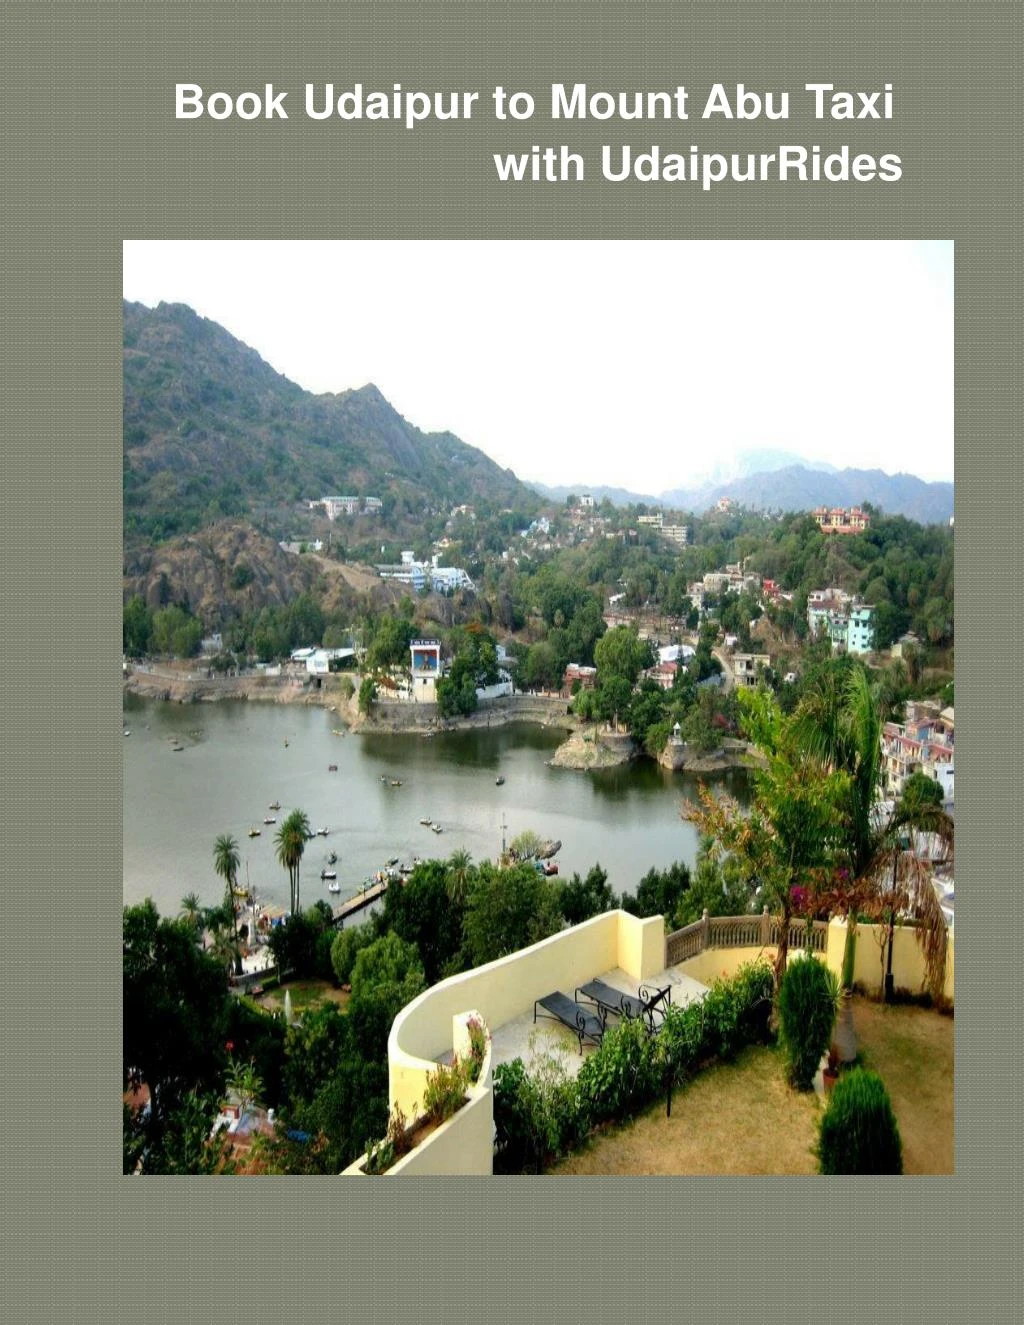 book udaipur to mount abu taxi with udaipu rrides